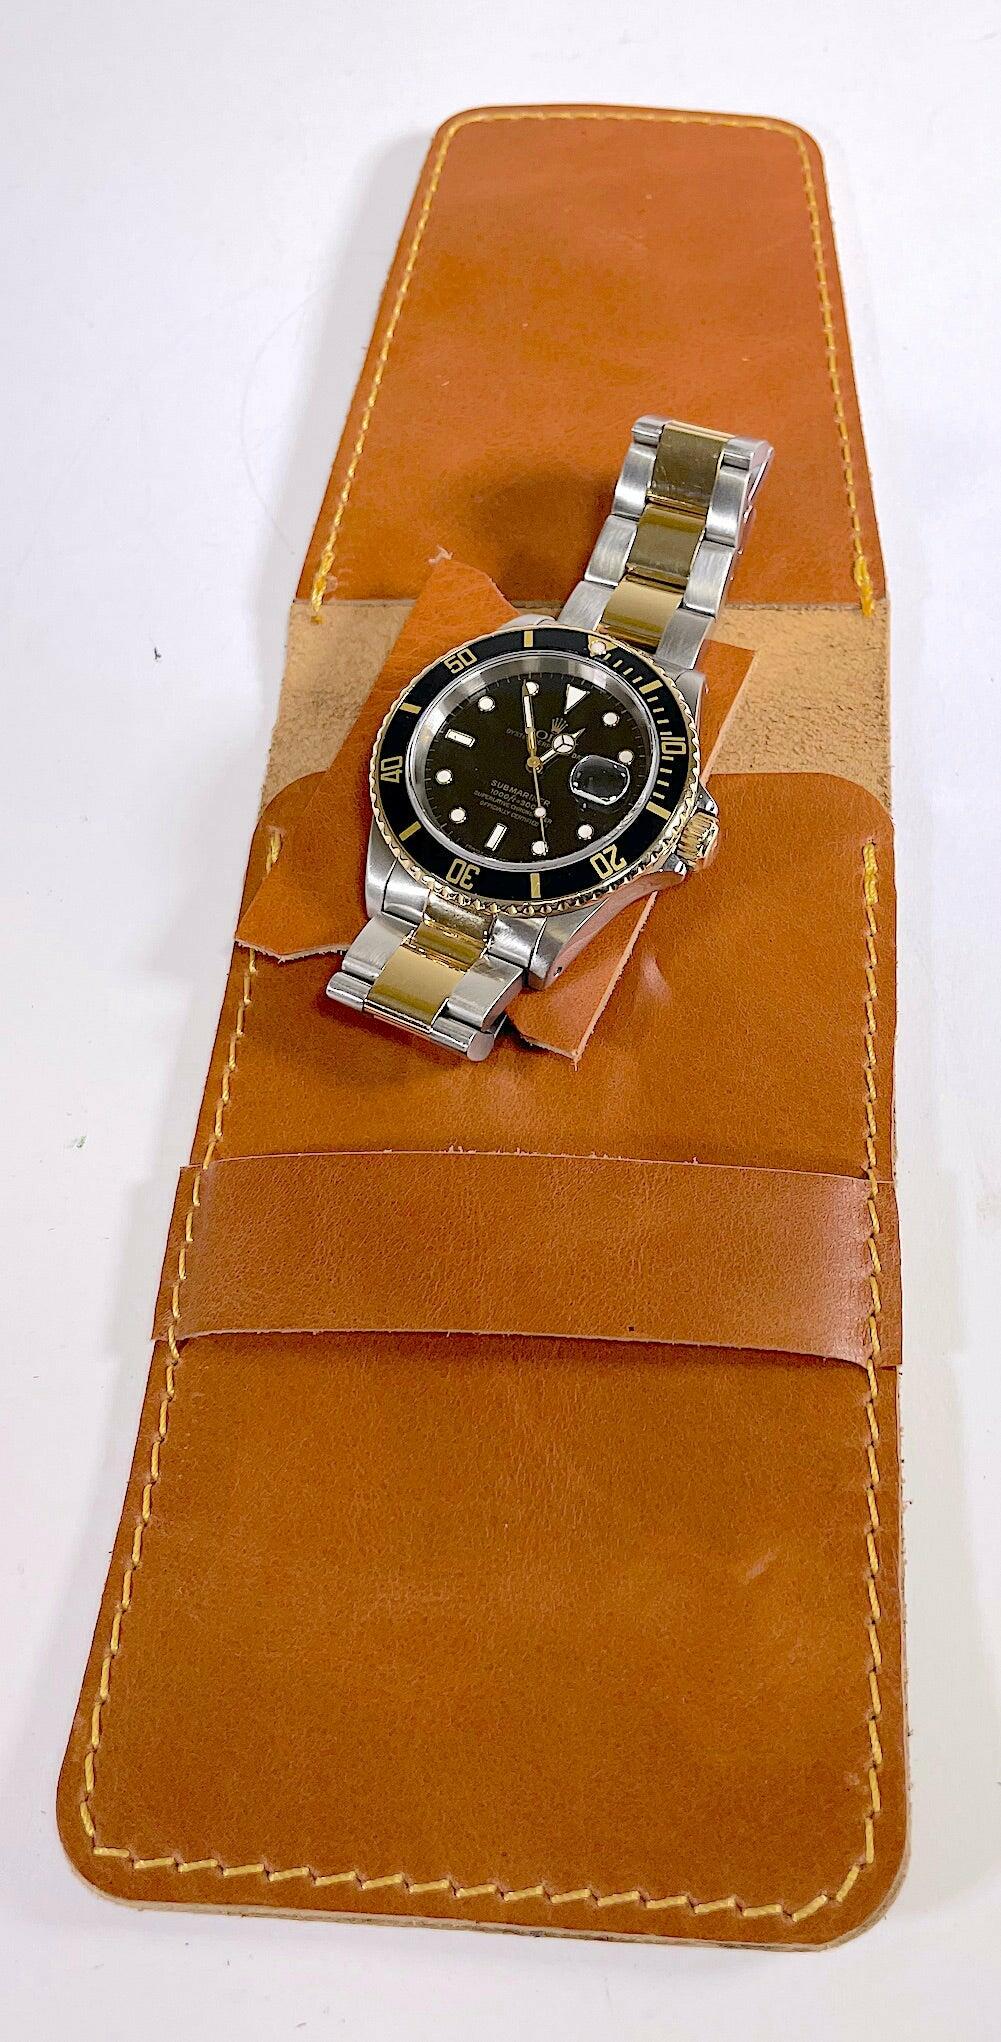 Watch Slipcase / Roll for 1 Watch in Tan Leather - The Classic Watch Buyers Club Ltd